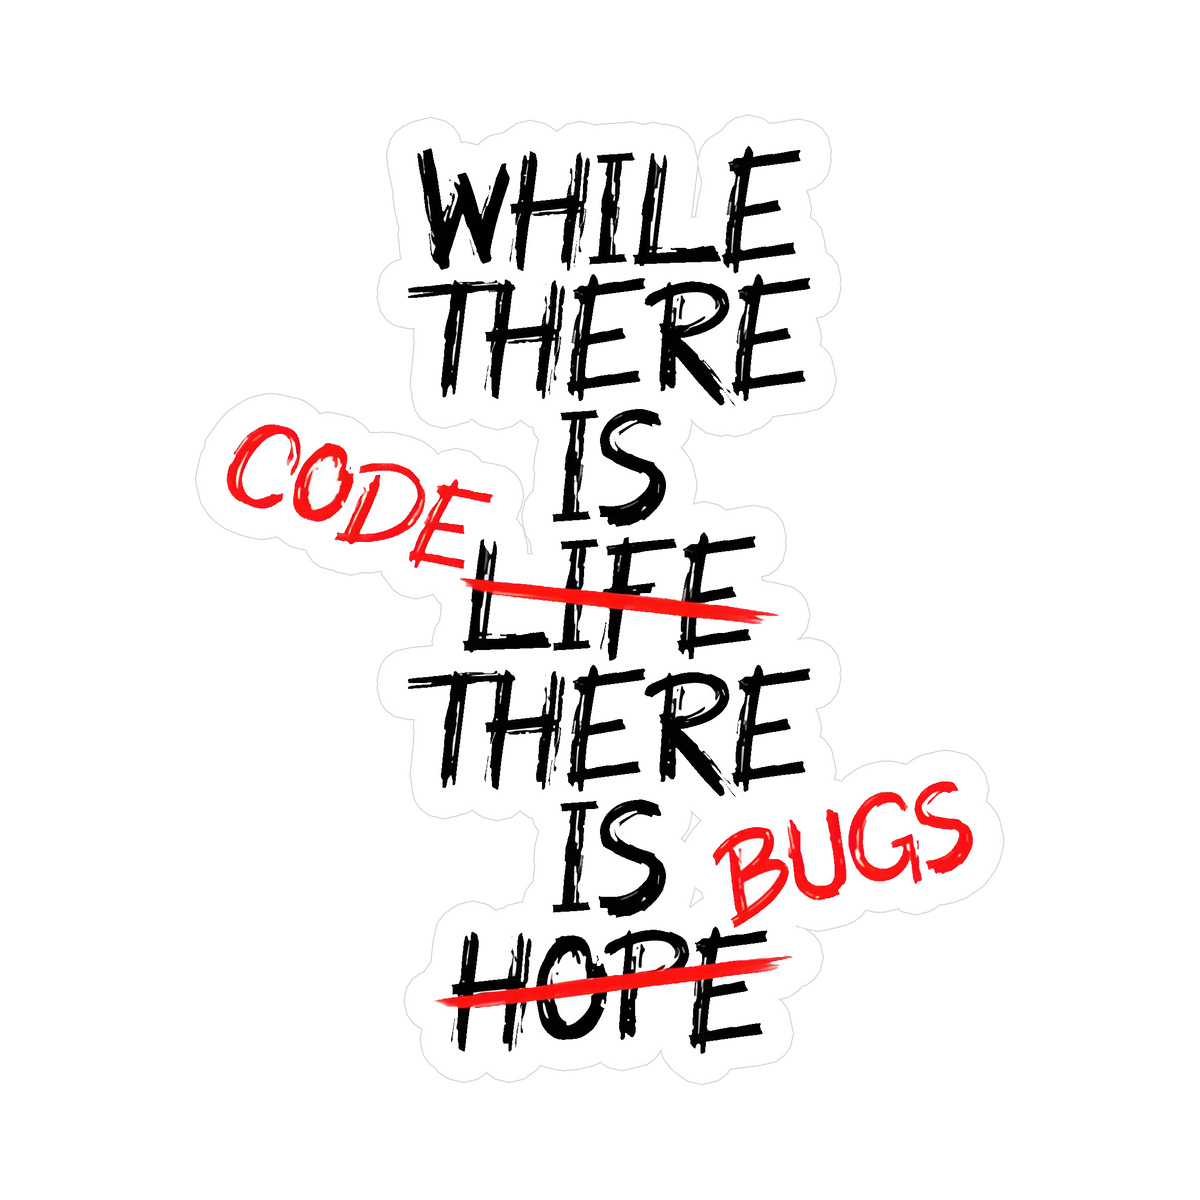 Codes and bugs Sticker